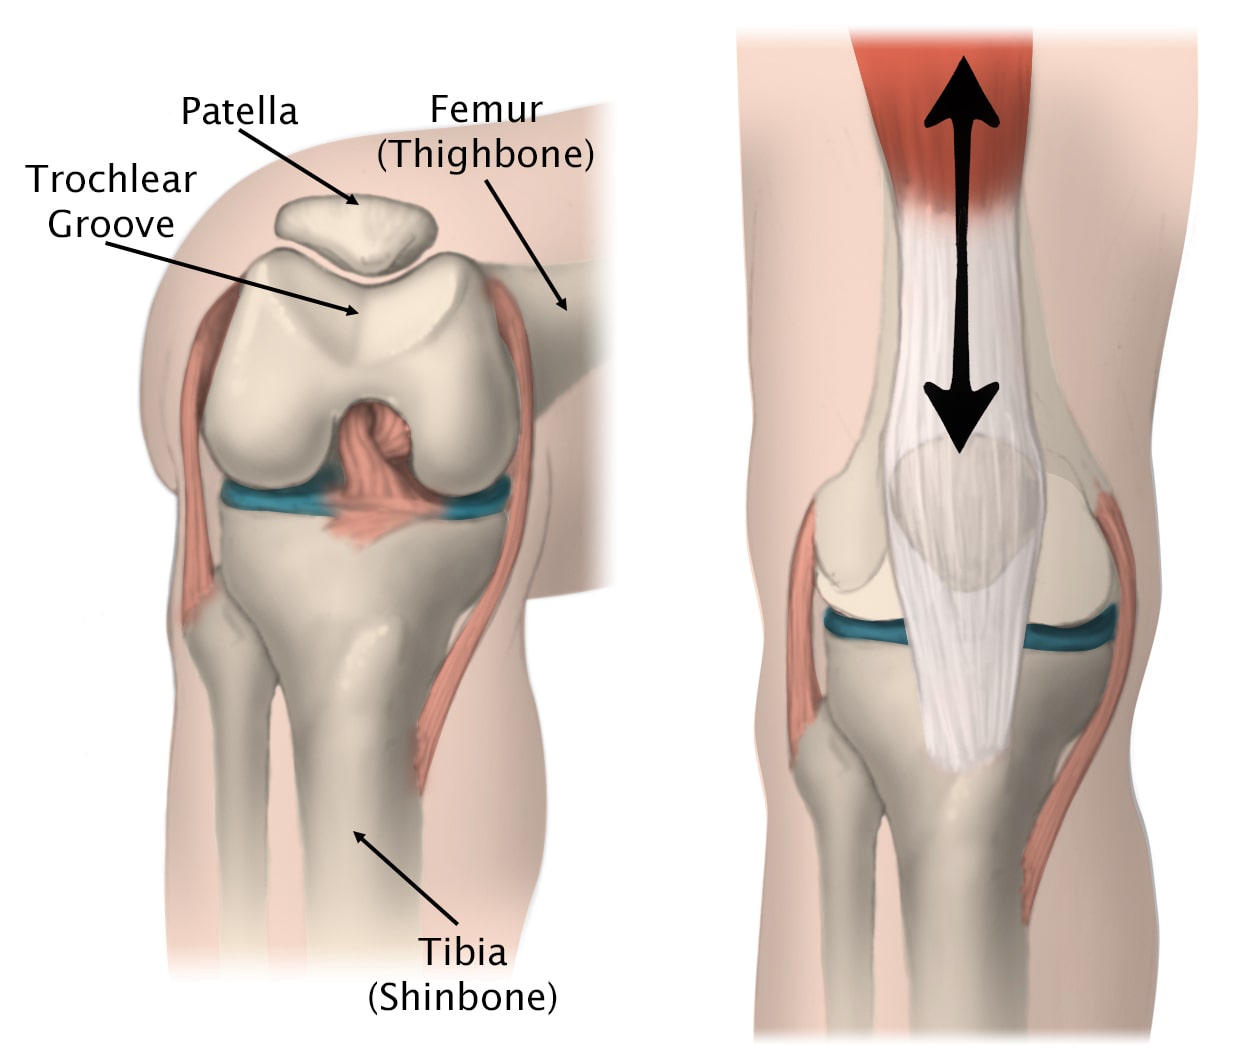 movement of the patella in the trochlear groove